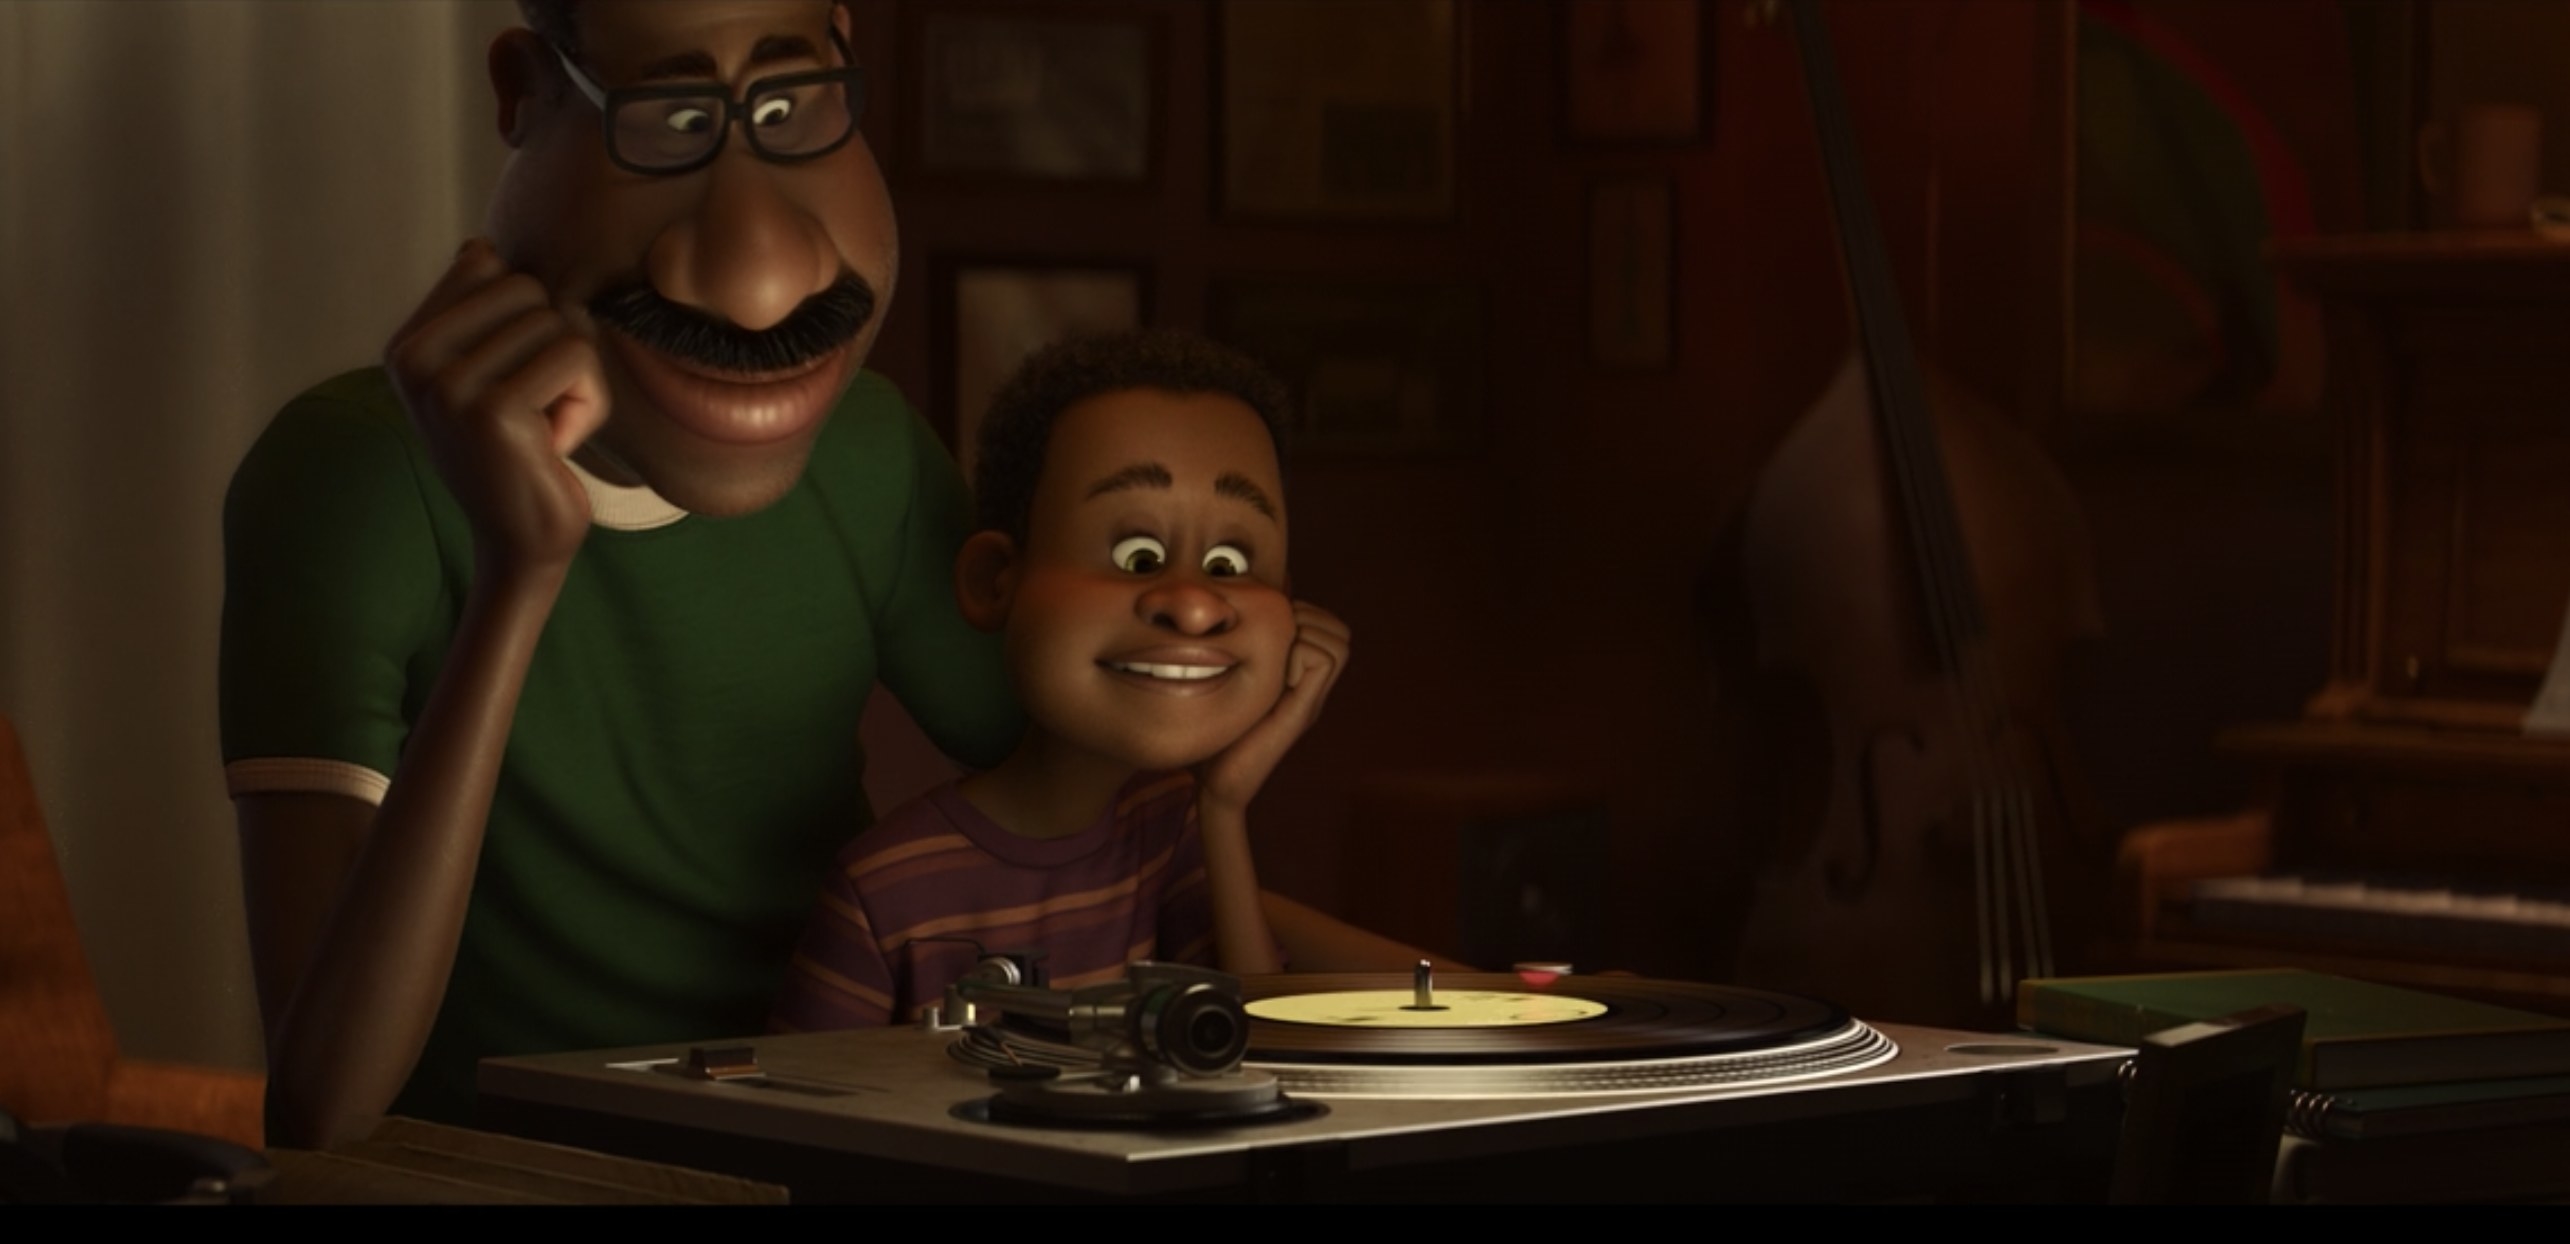 Joe as a kid listening to music with his father